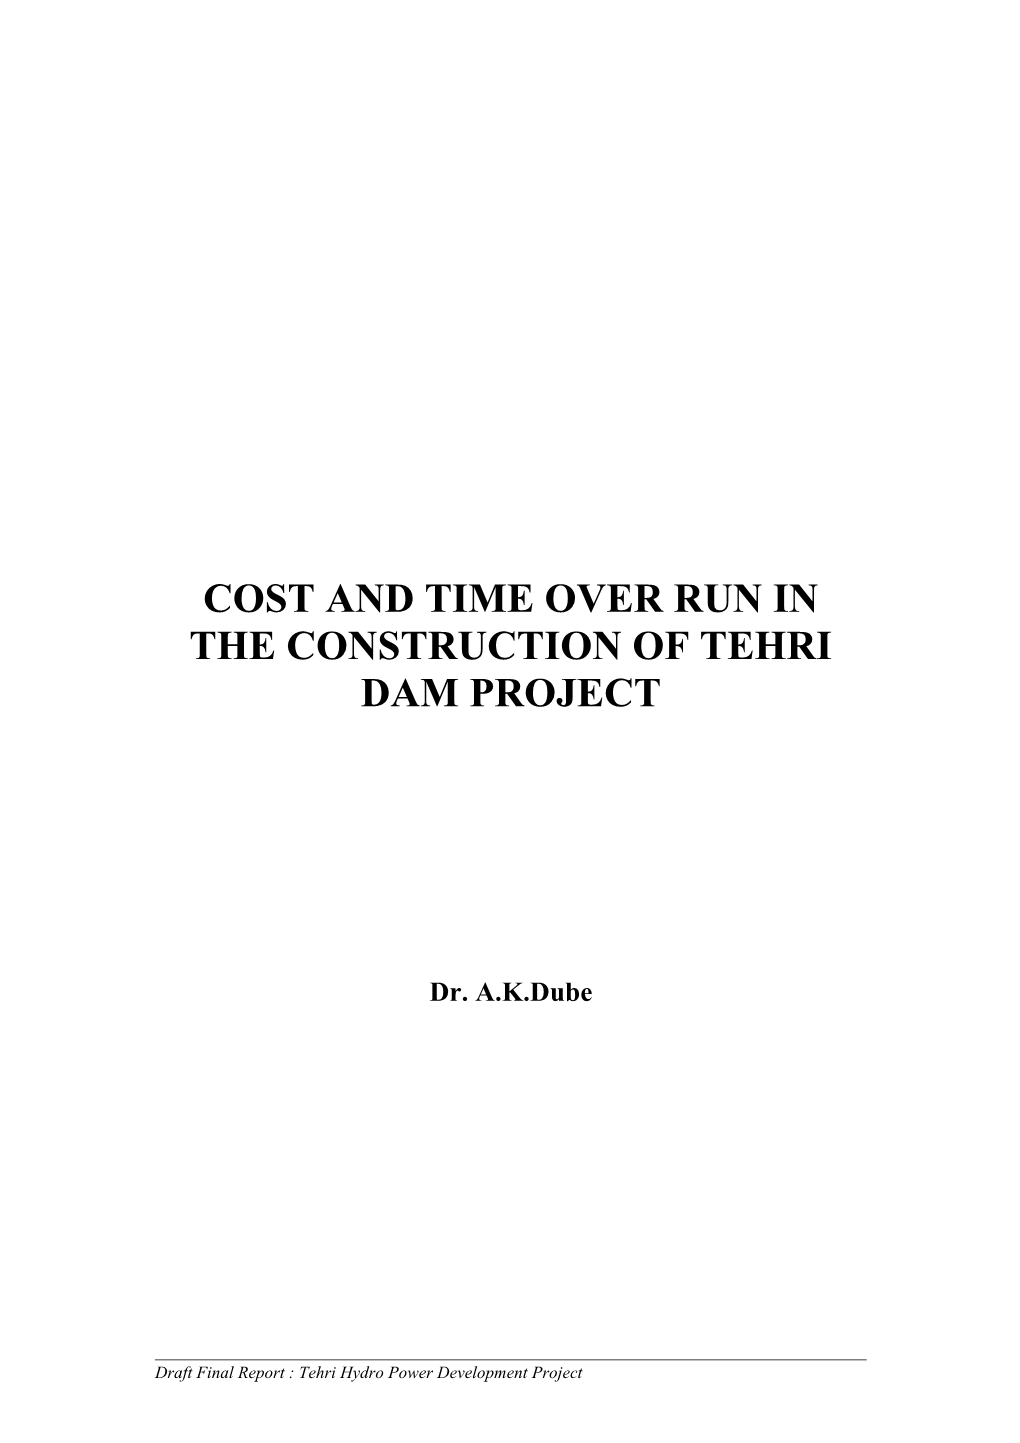 DRAFT REPORT Report on Tehri Dam Hydro Power Project (THDCL), Uttaranchal